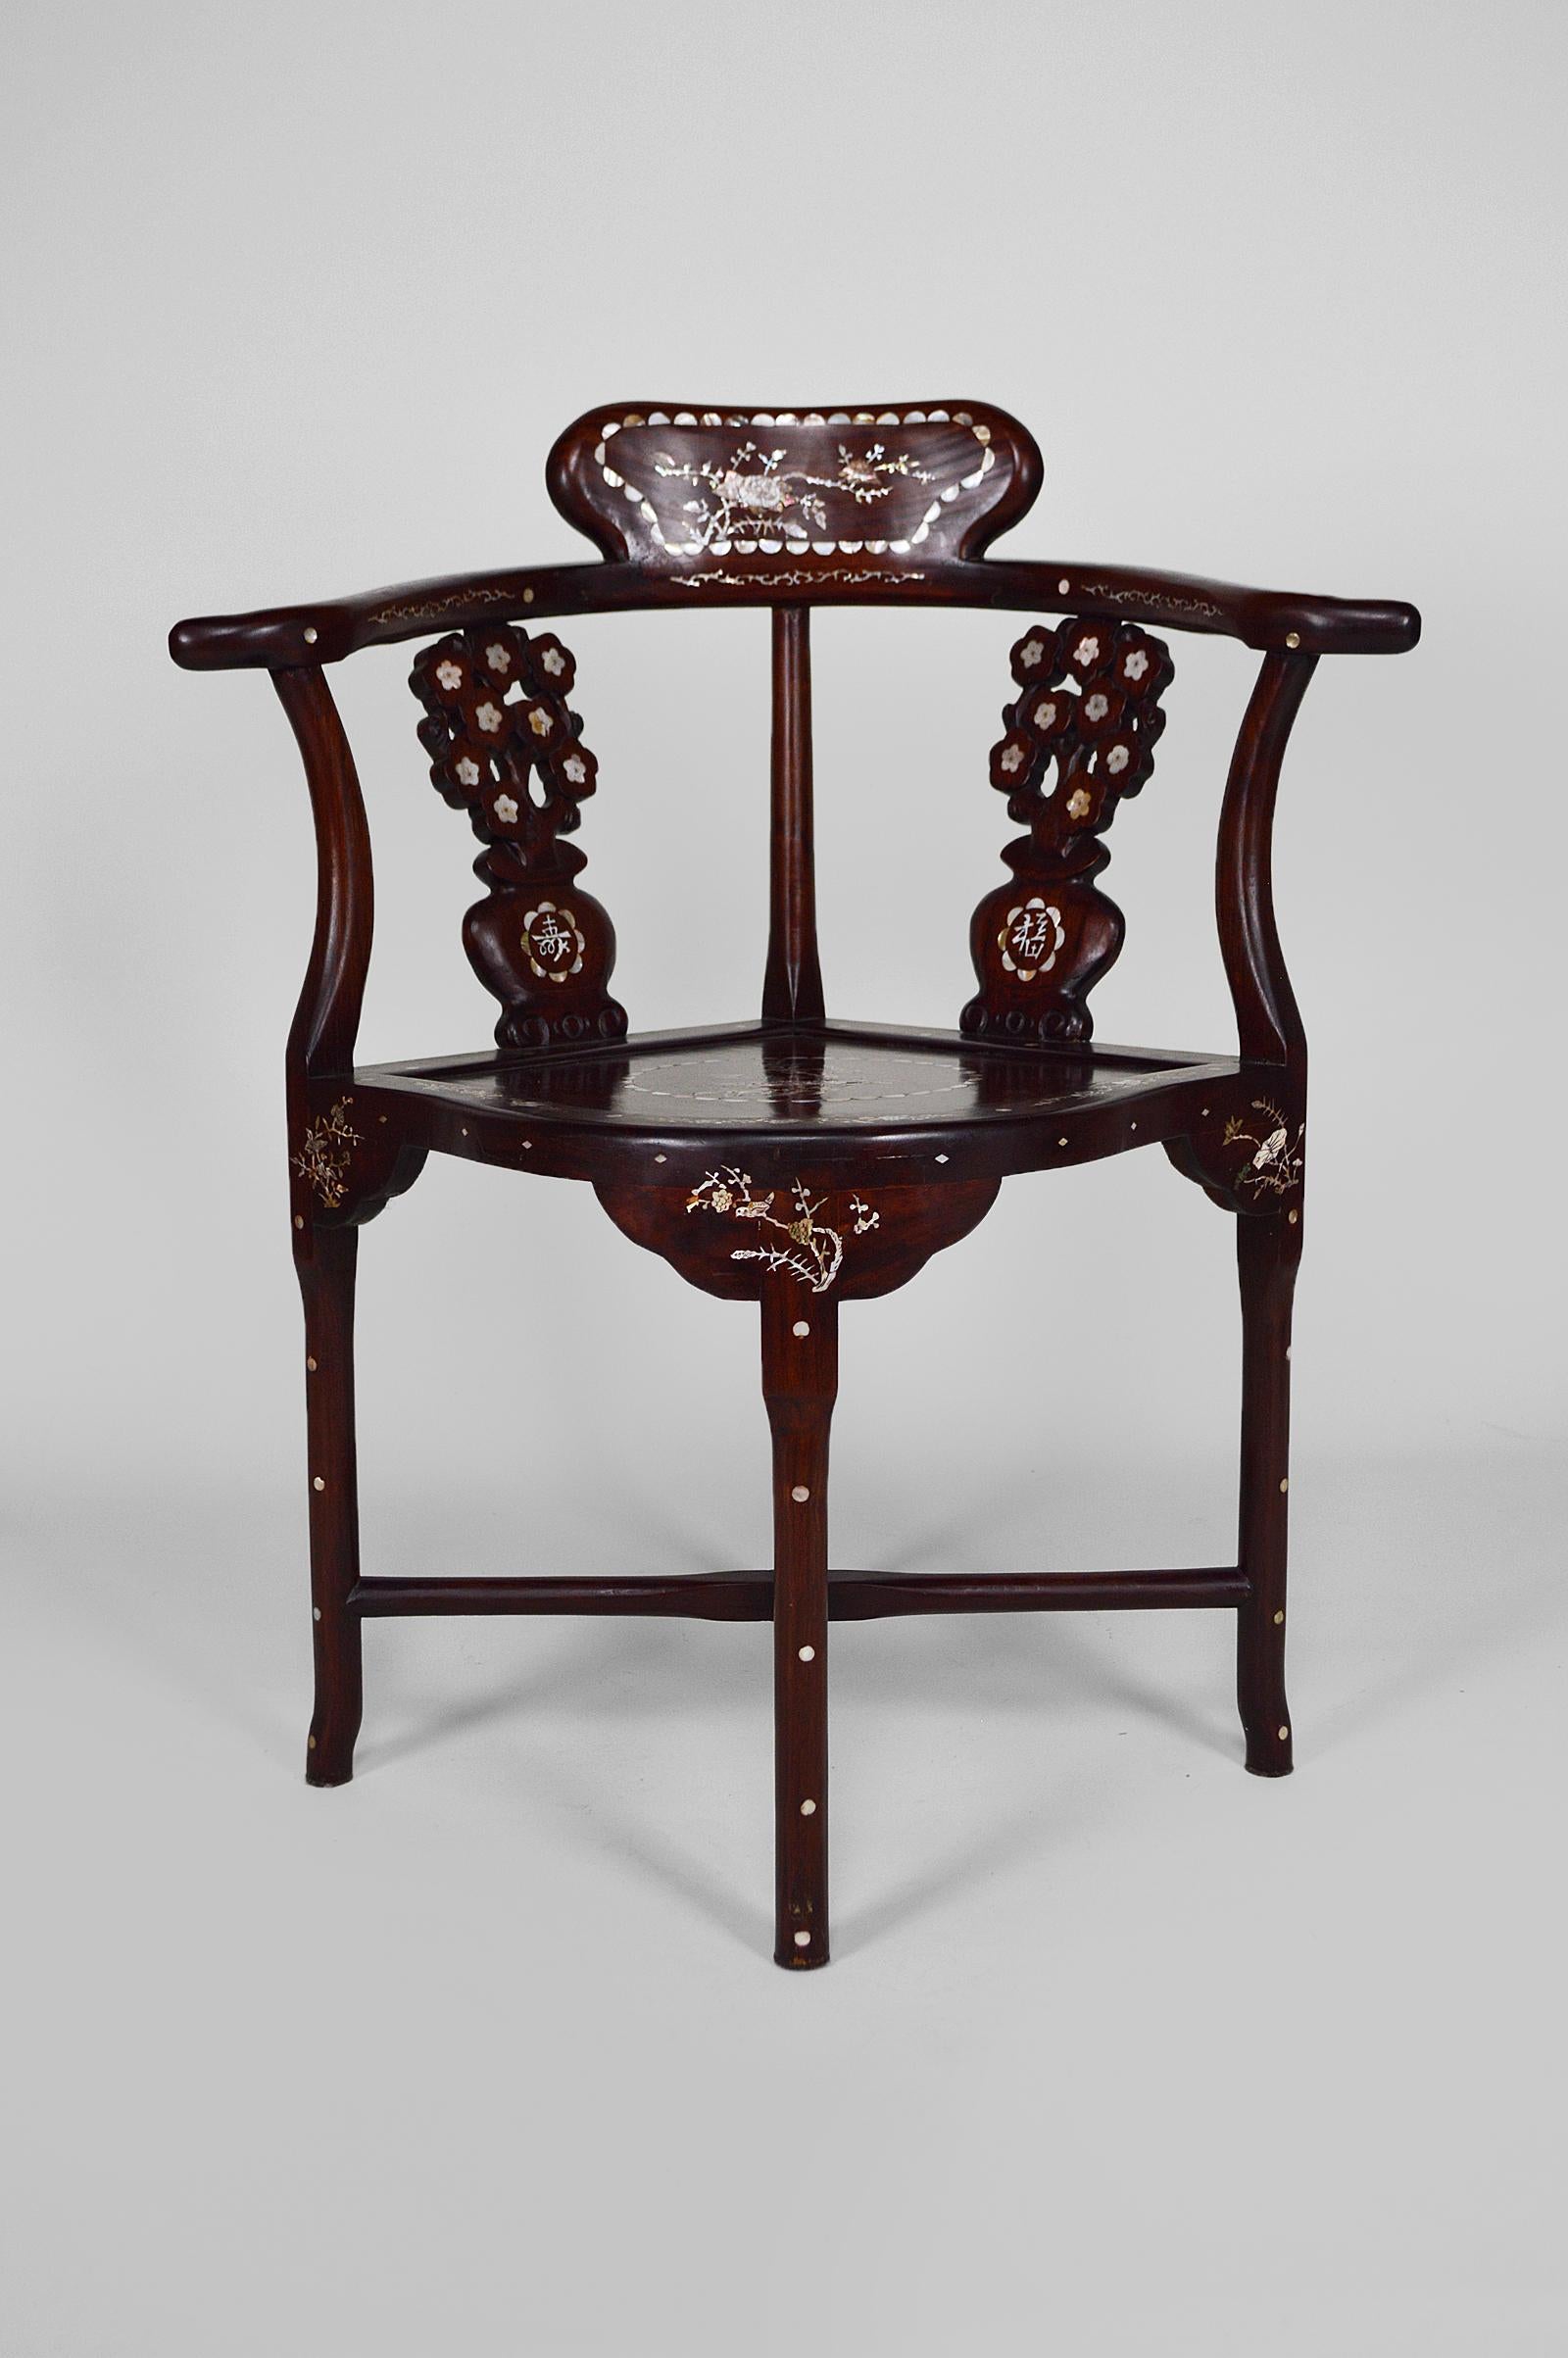 Set of 4 Asian Armchairs in Carved and Inlaid Wood, circa 1900-1920 For Sale 2